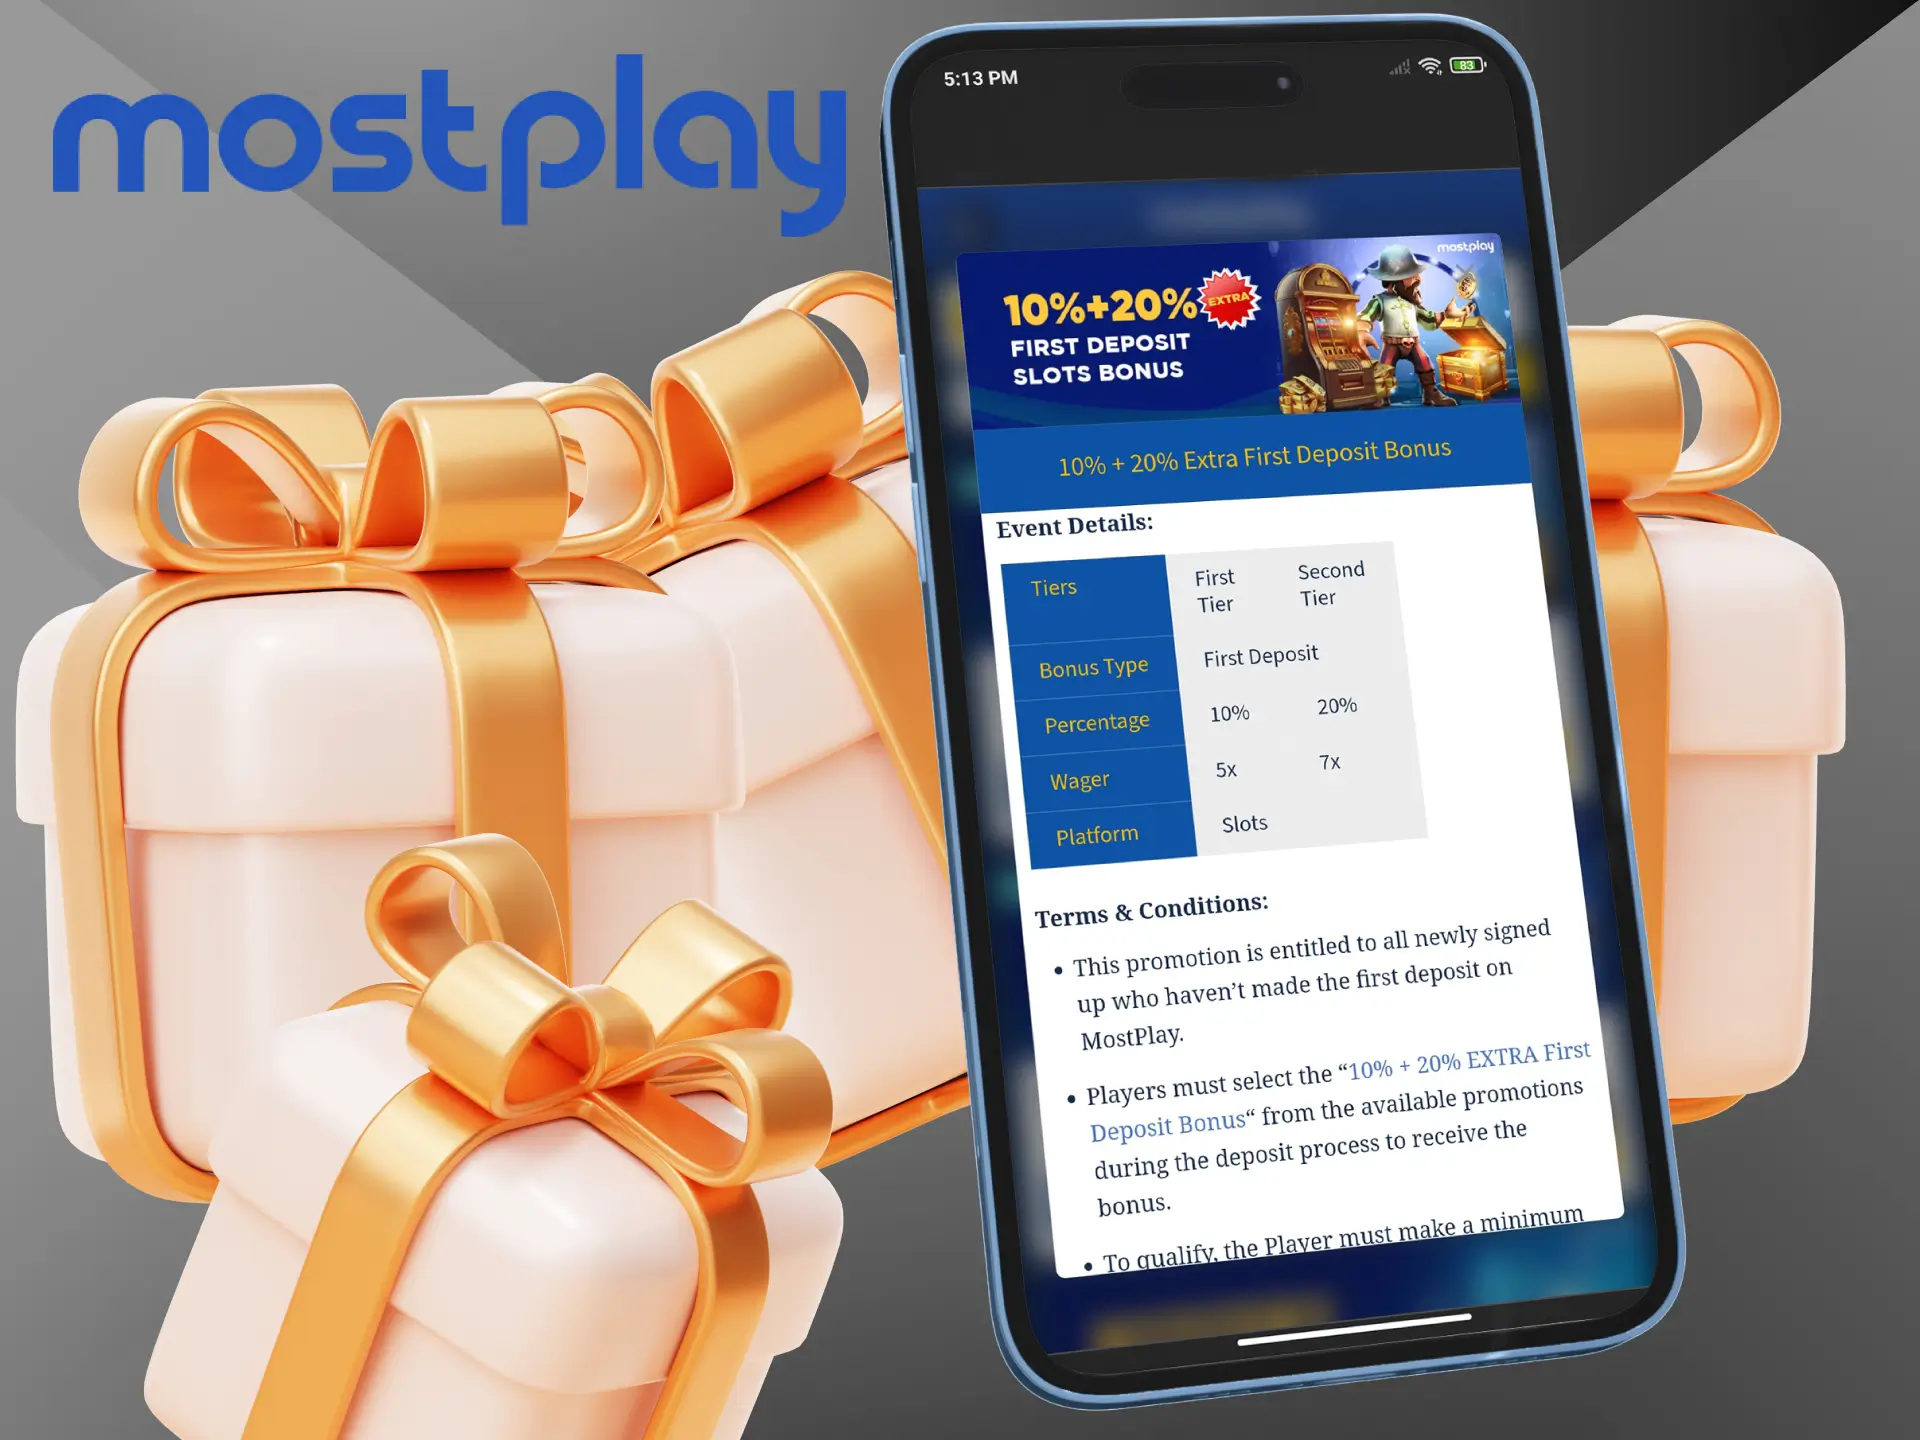 Learn all the necessary steps to wagering and using bonuses from Mostplay.